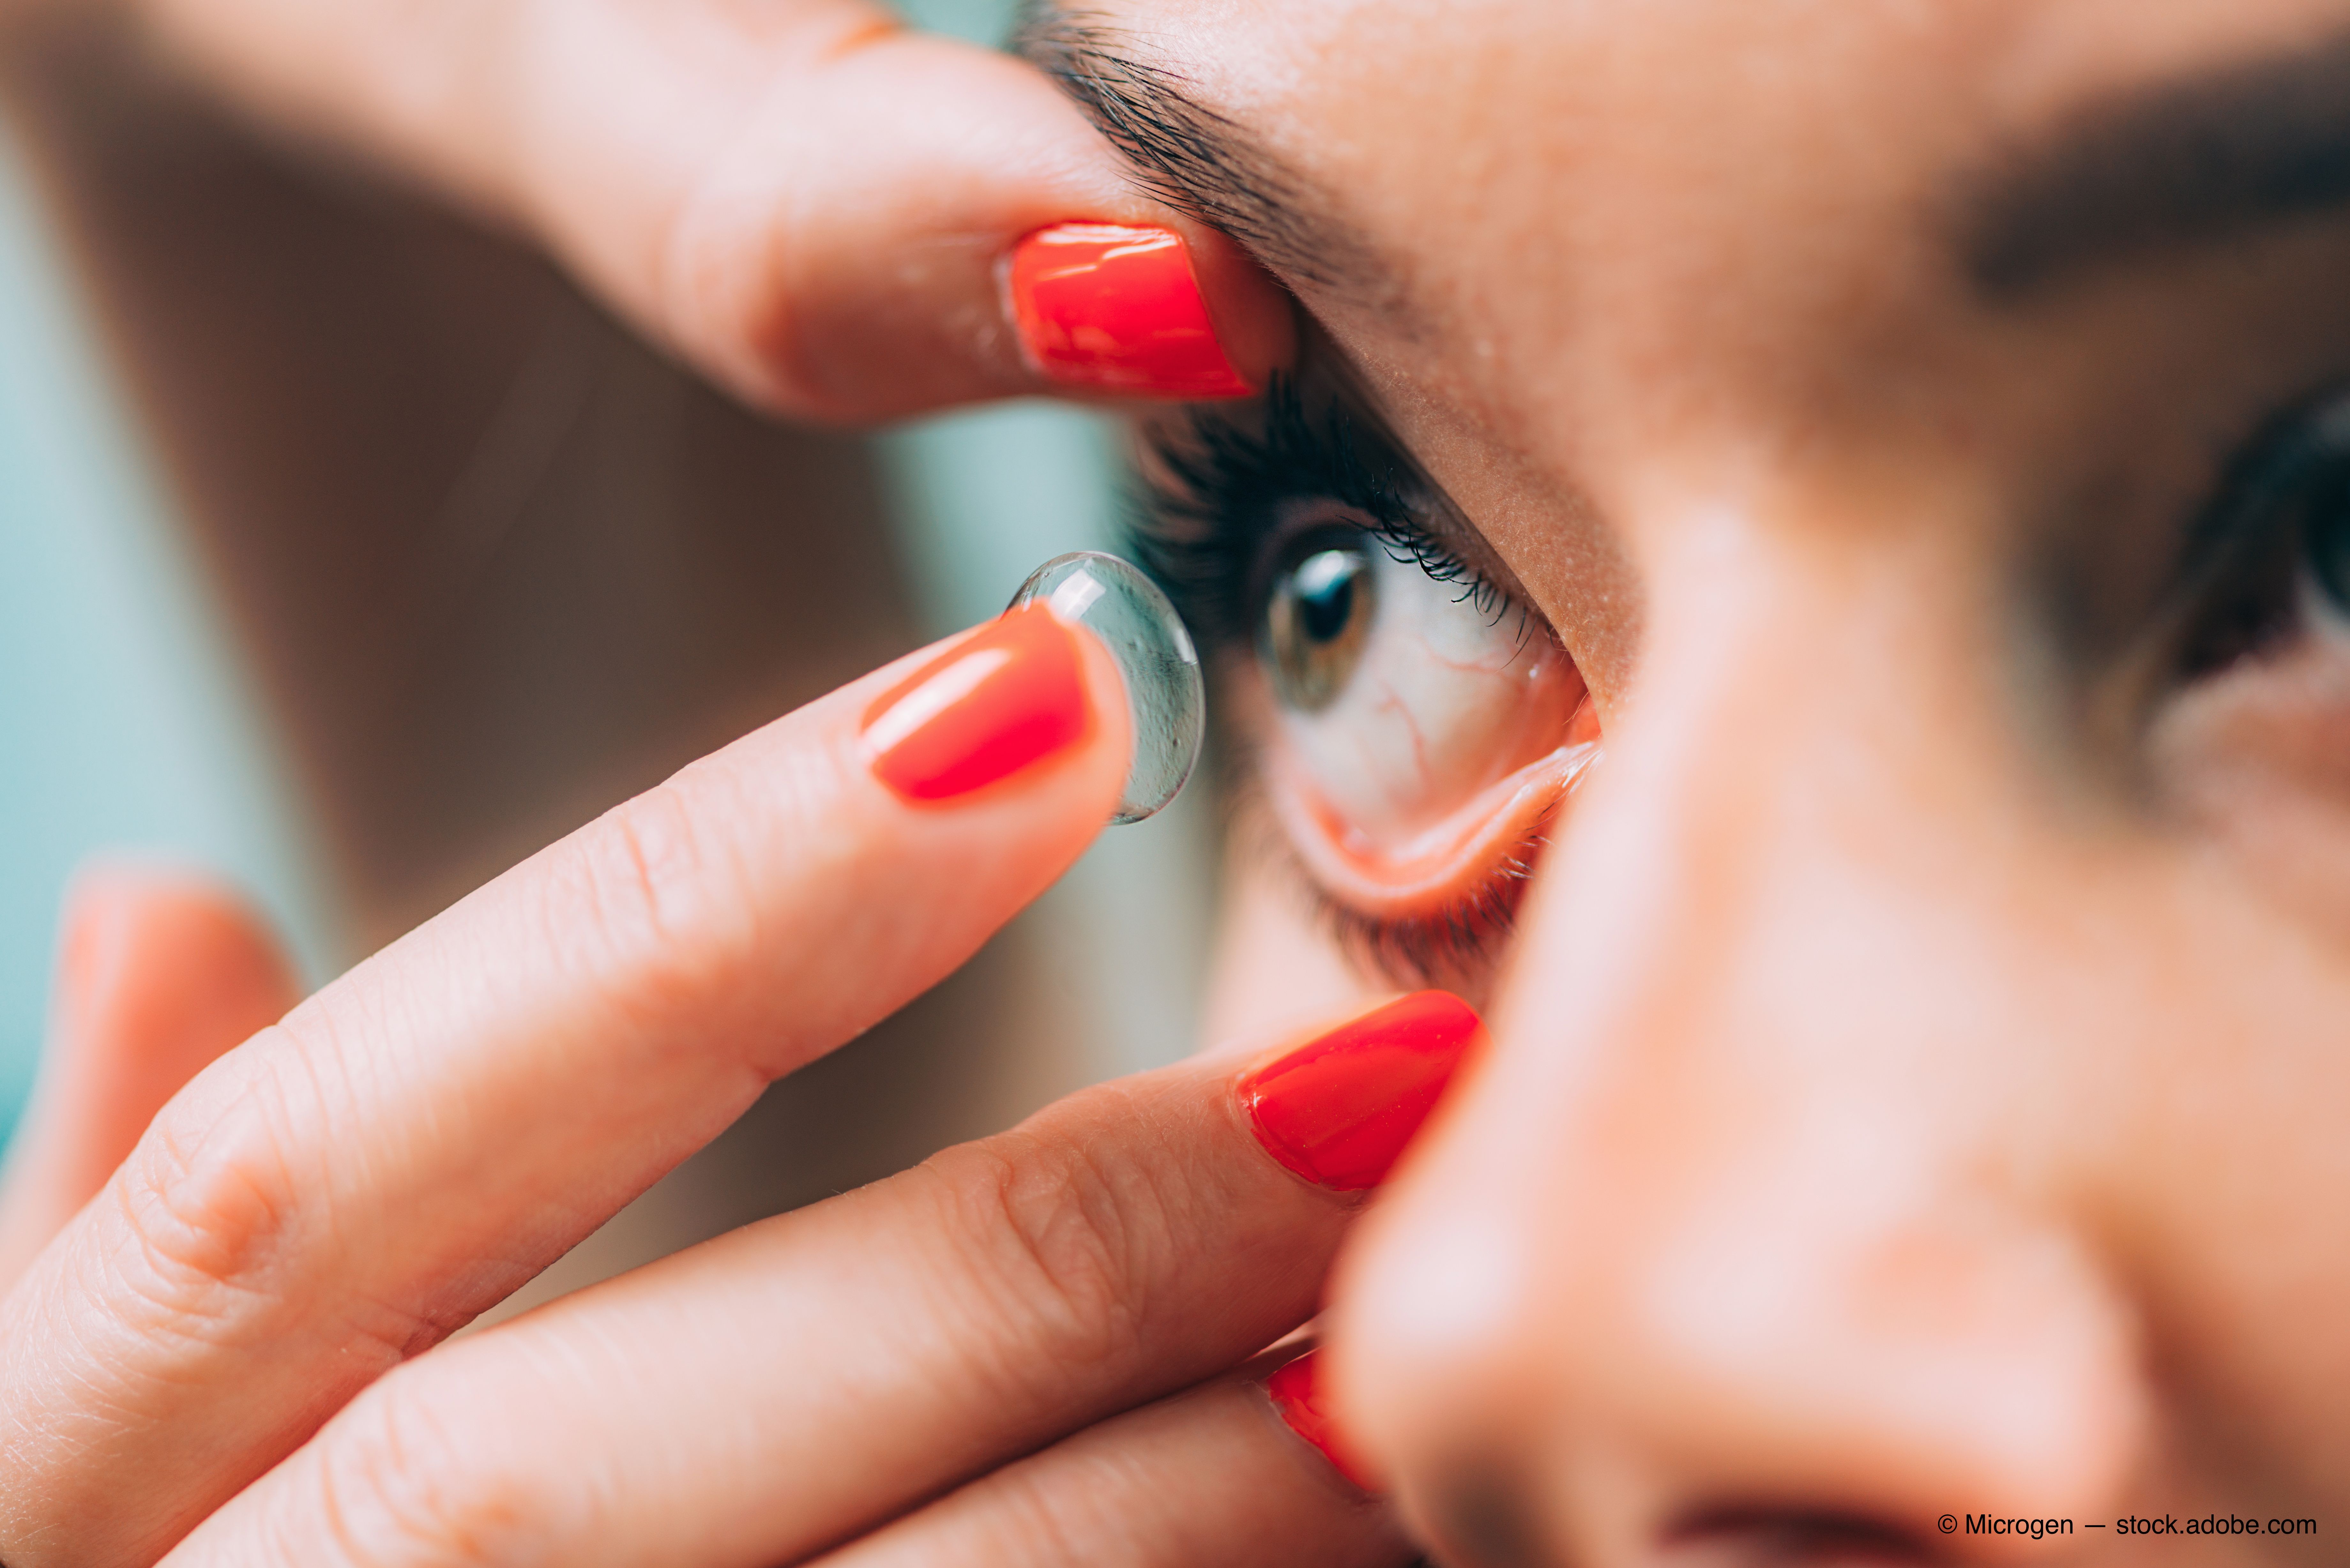 woman with red nails puts clear contact lens into her eye